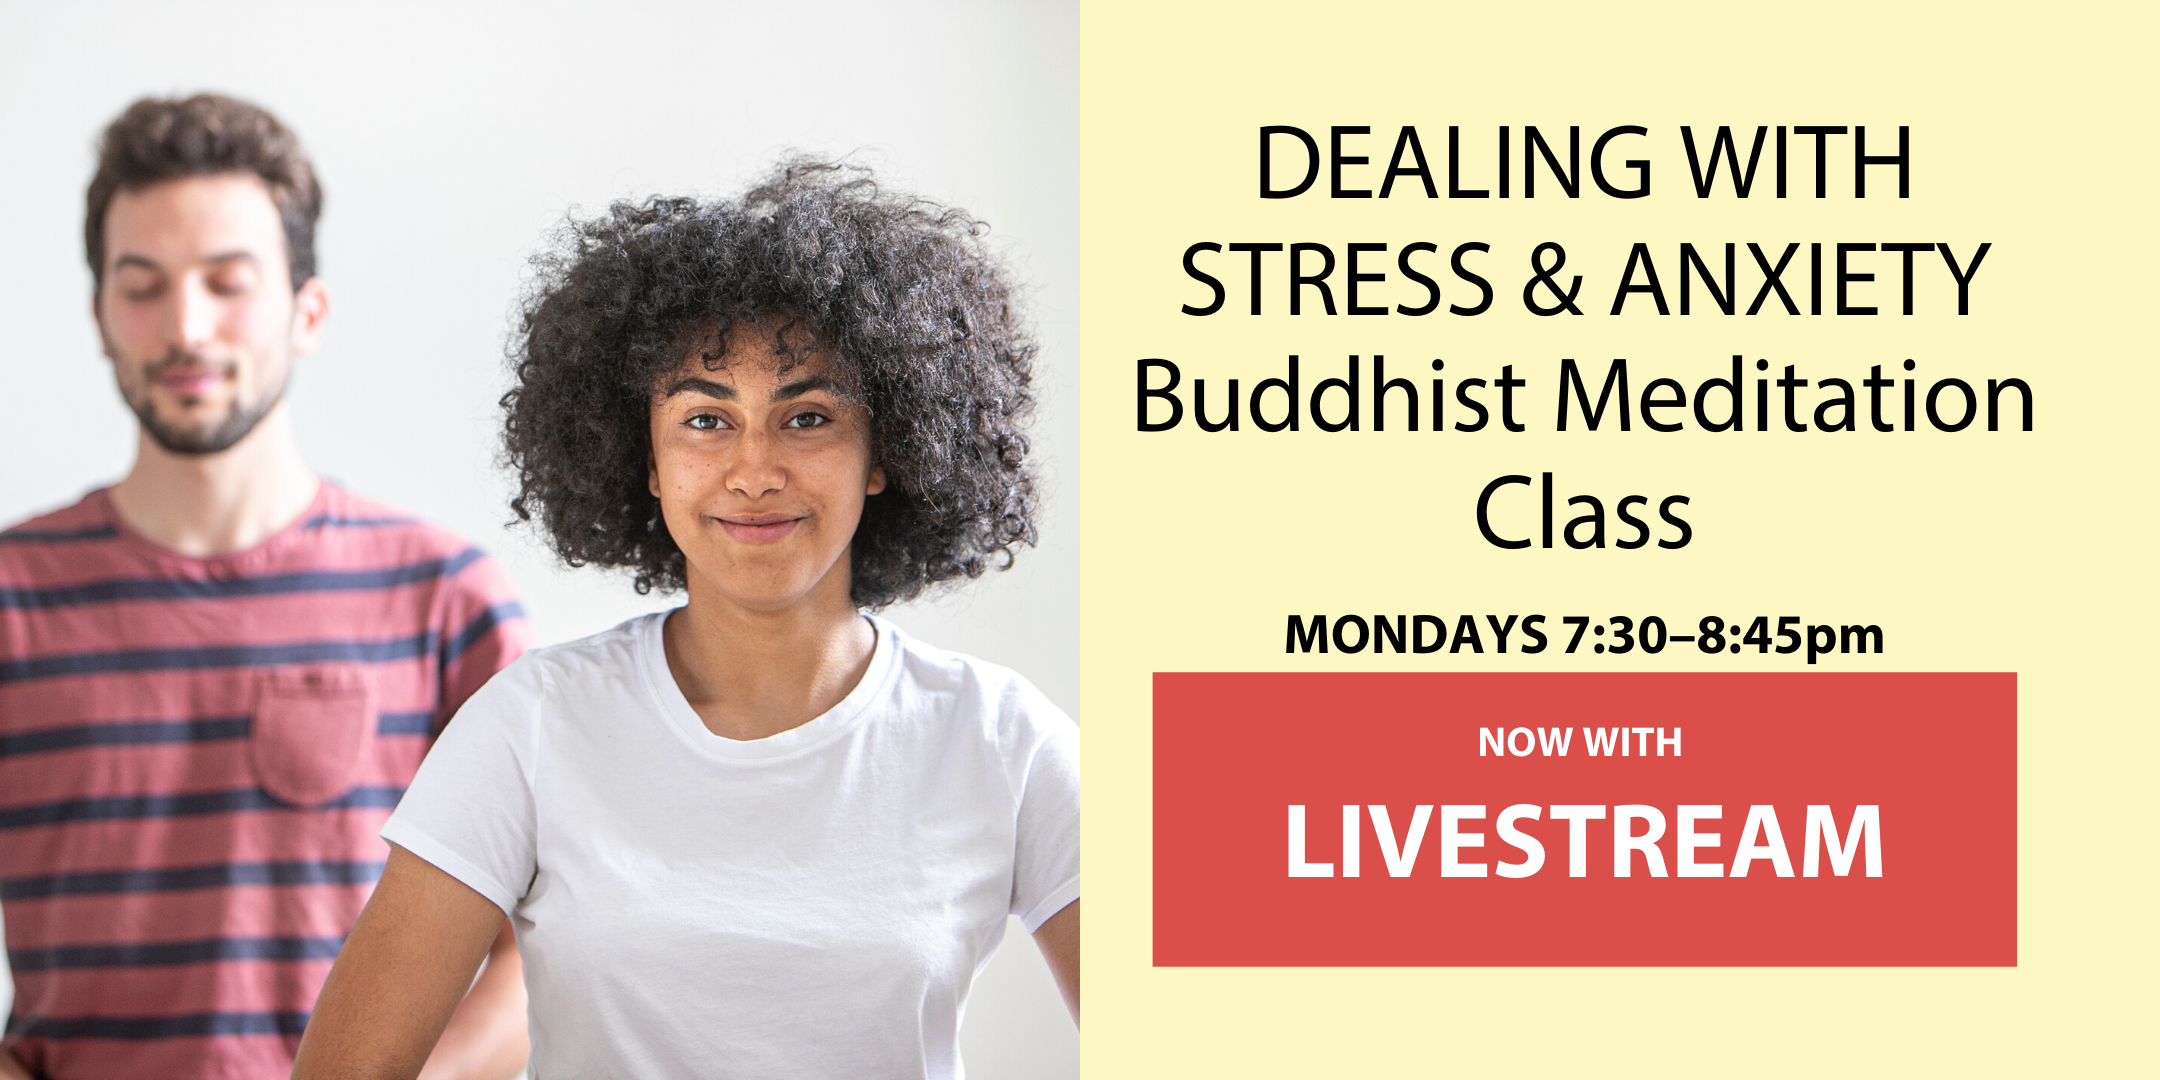 Dealing with Stress & Anxiety: Buddhist Meditation with LIVESTREAM